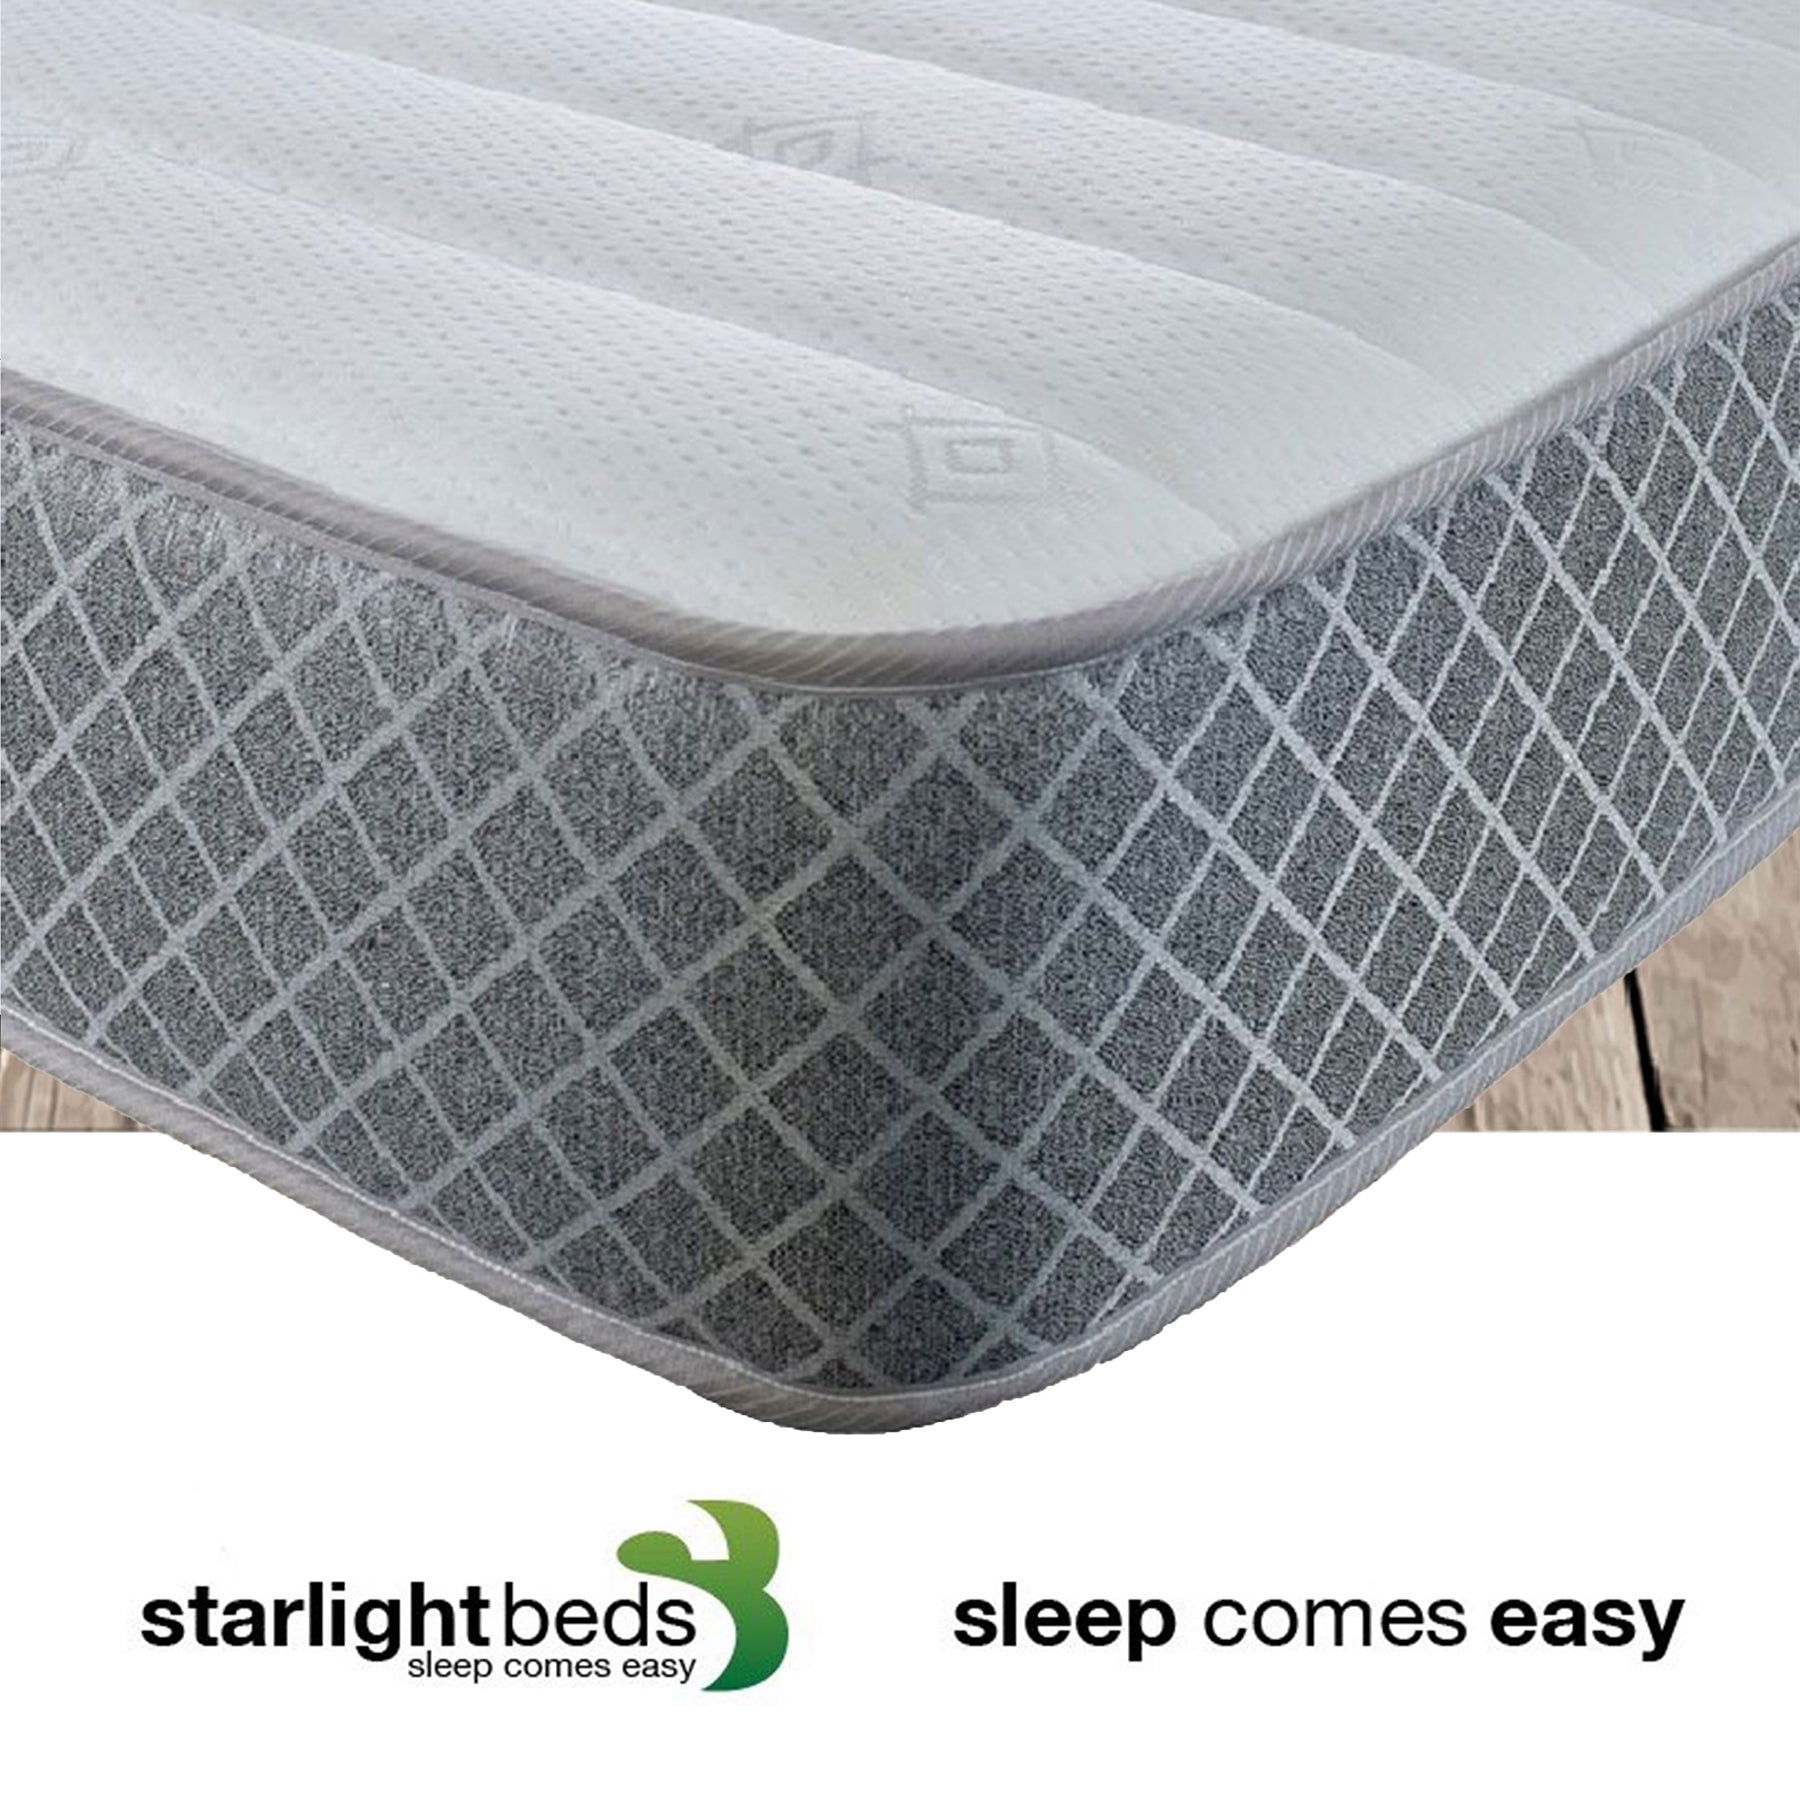 Starlight Beds™ 7" Deep Budget Friendly Classic Straight line design with Cool touch finish Memory foam and Spring Mattress